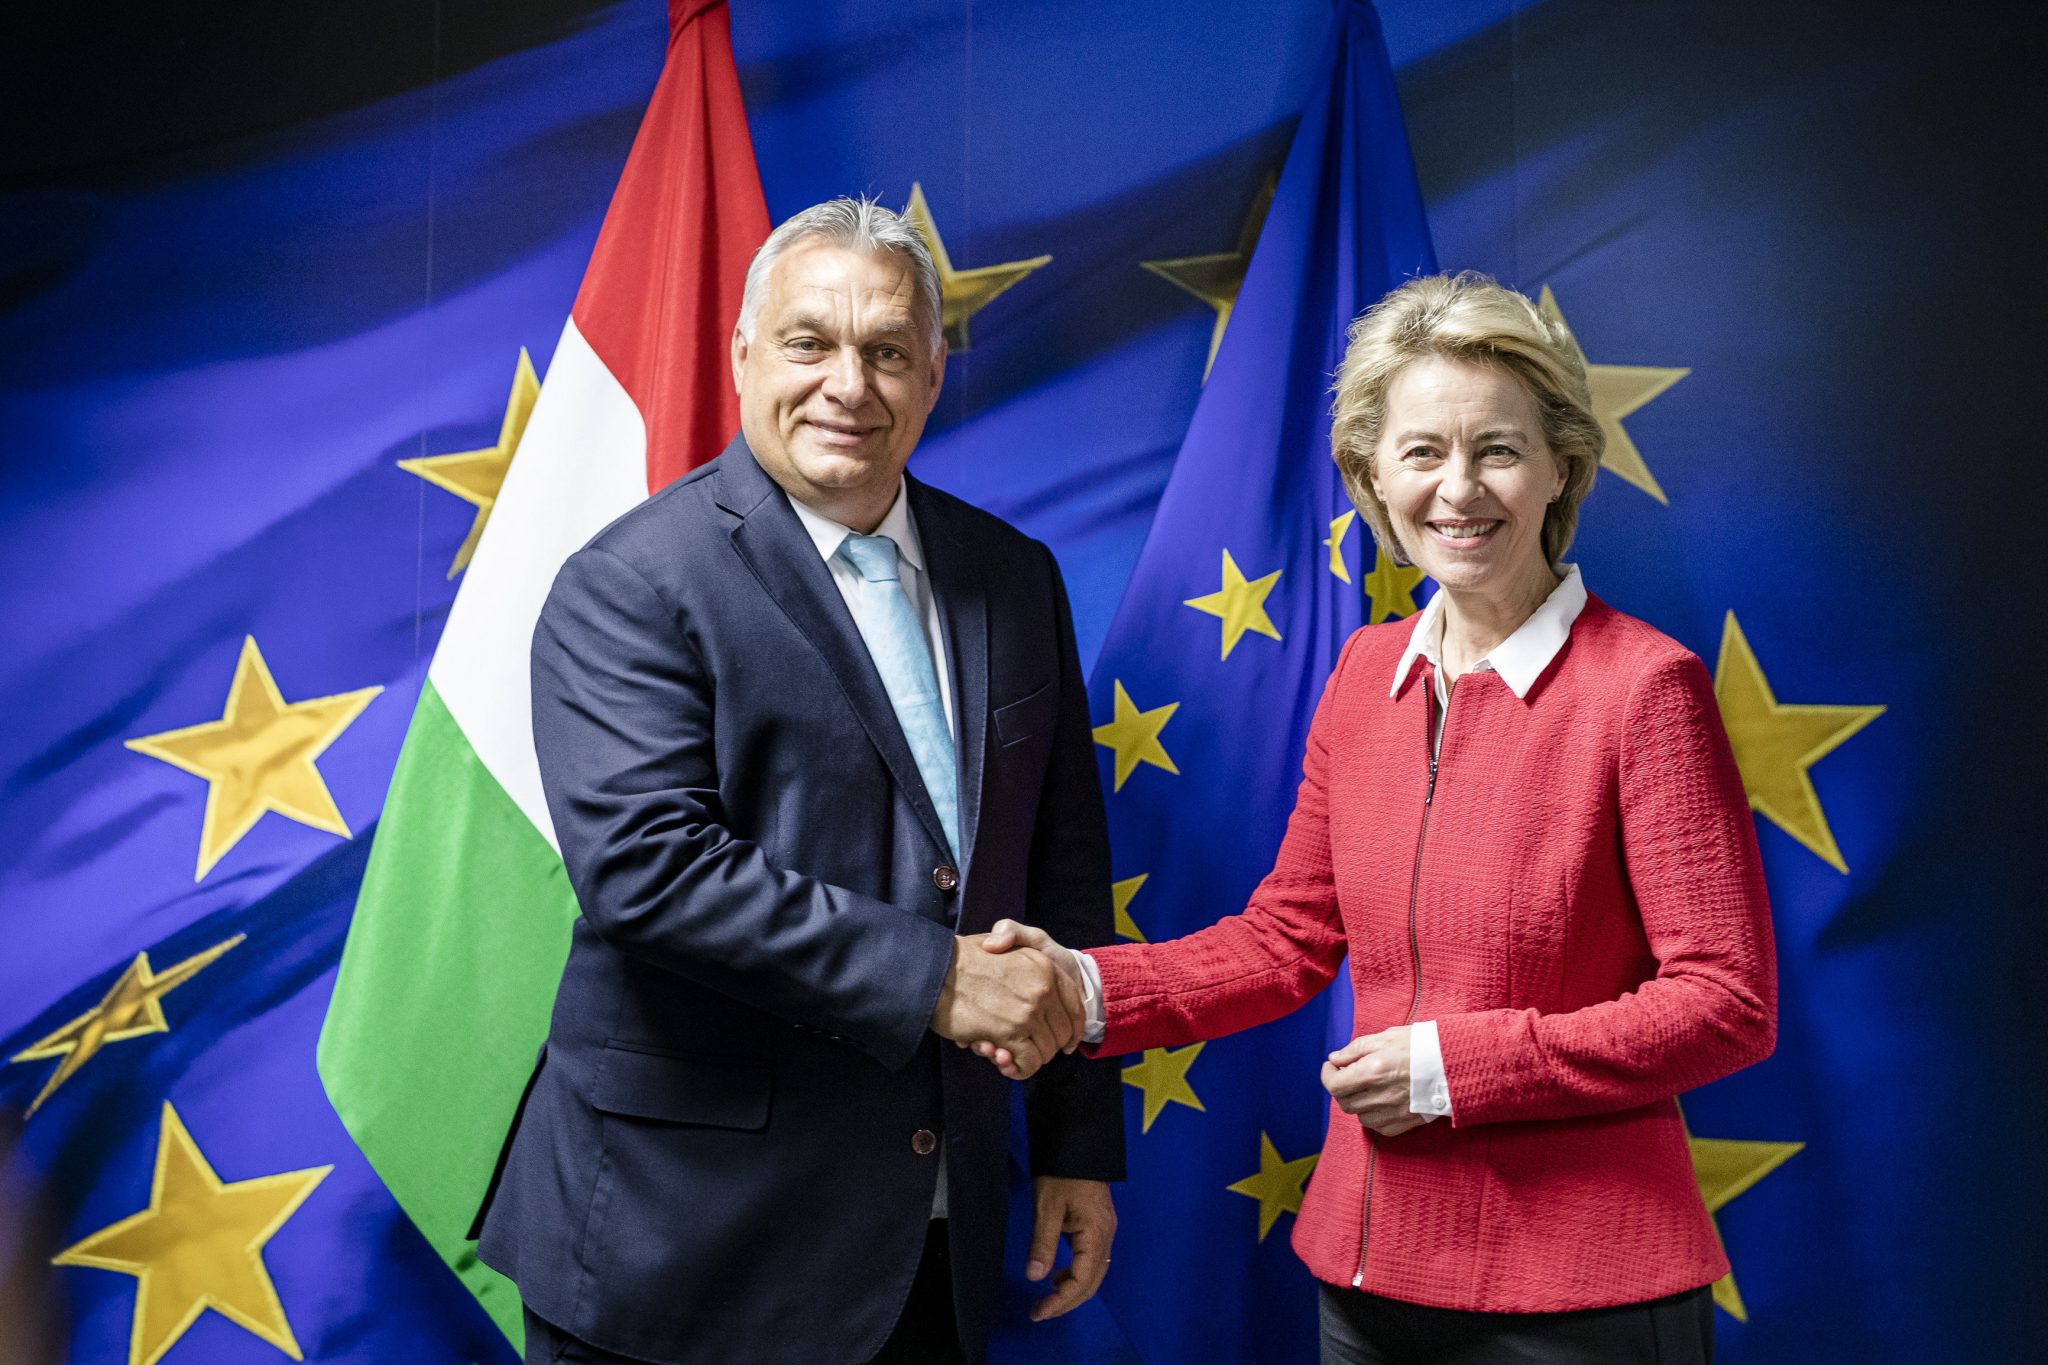 Orbán after Meeting: Decision to Back Von der Leyen 'Good' - Hungary Today